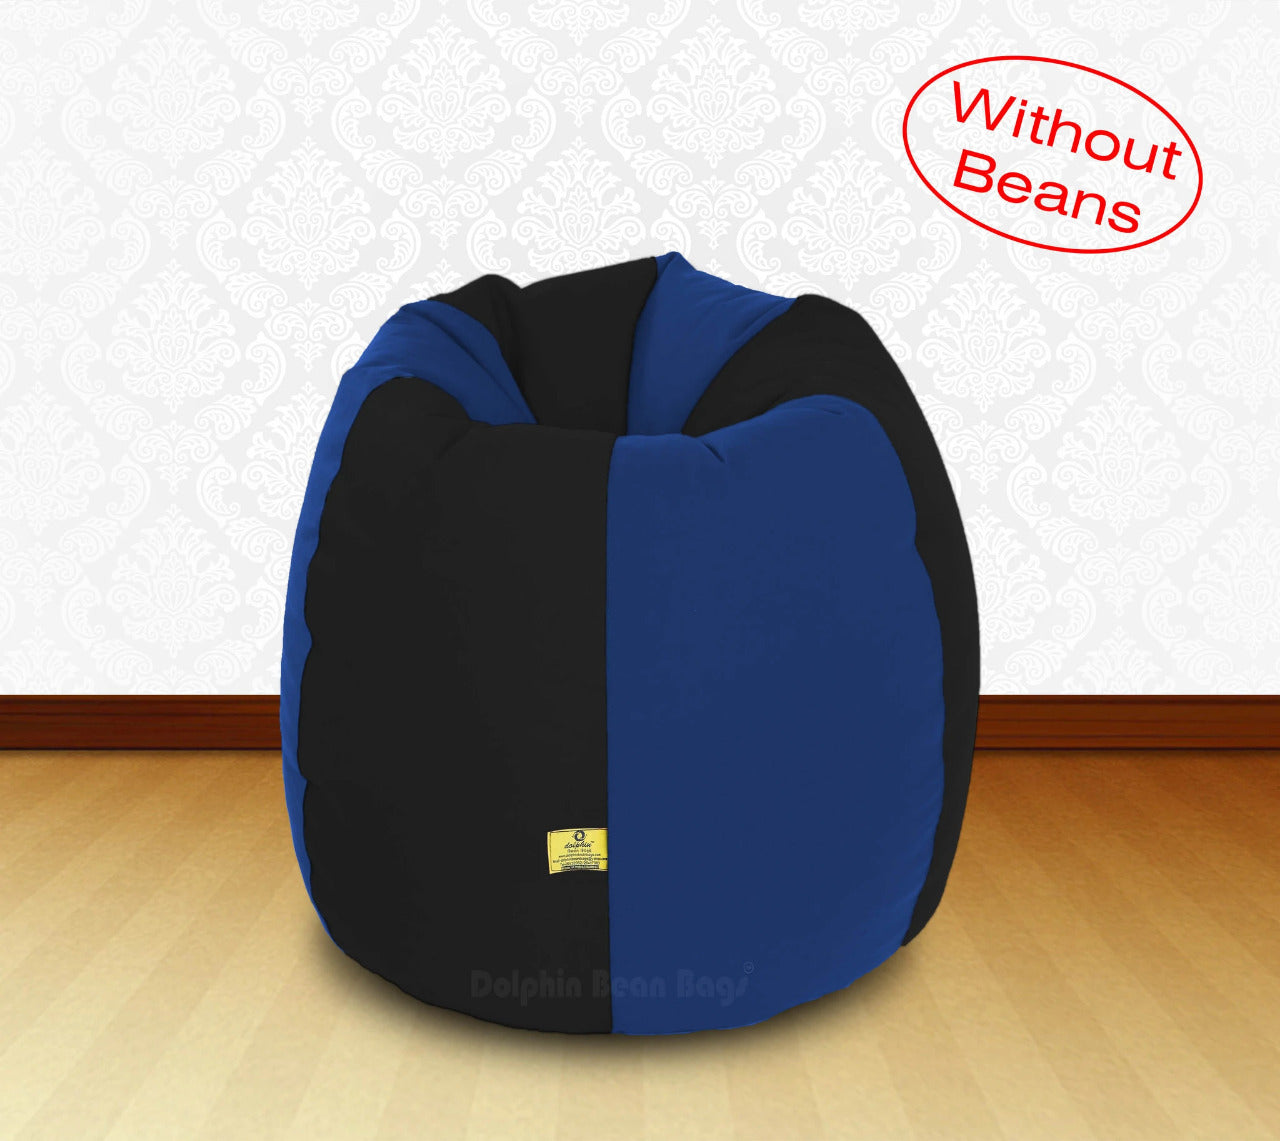 Bean Bag XL Black R.Blue-FABRIC-COVERS(without Beans)Bean Bag: XL Black/R.Blue Fabric Cover (Without Beans)